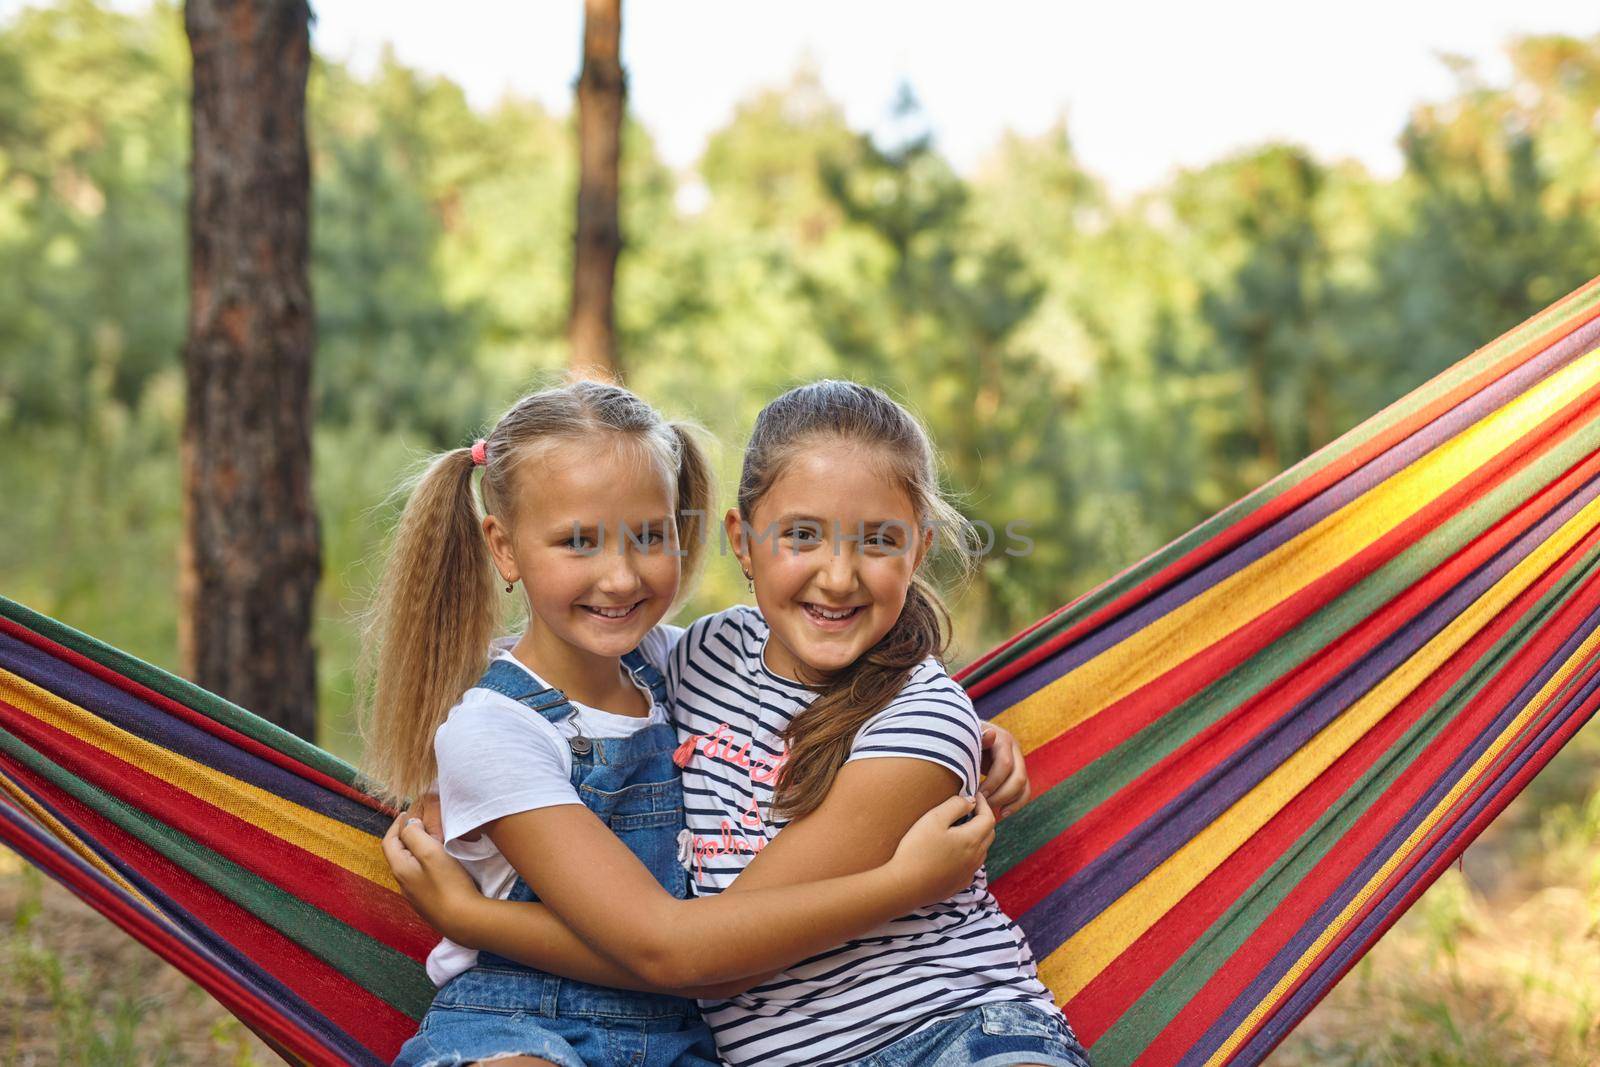 Kids relax in colorful rainbow hammock. Hot day garden outdoor fun. Afternoon nap during summer vacation. Children relaxing.